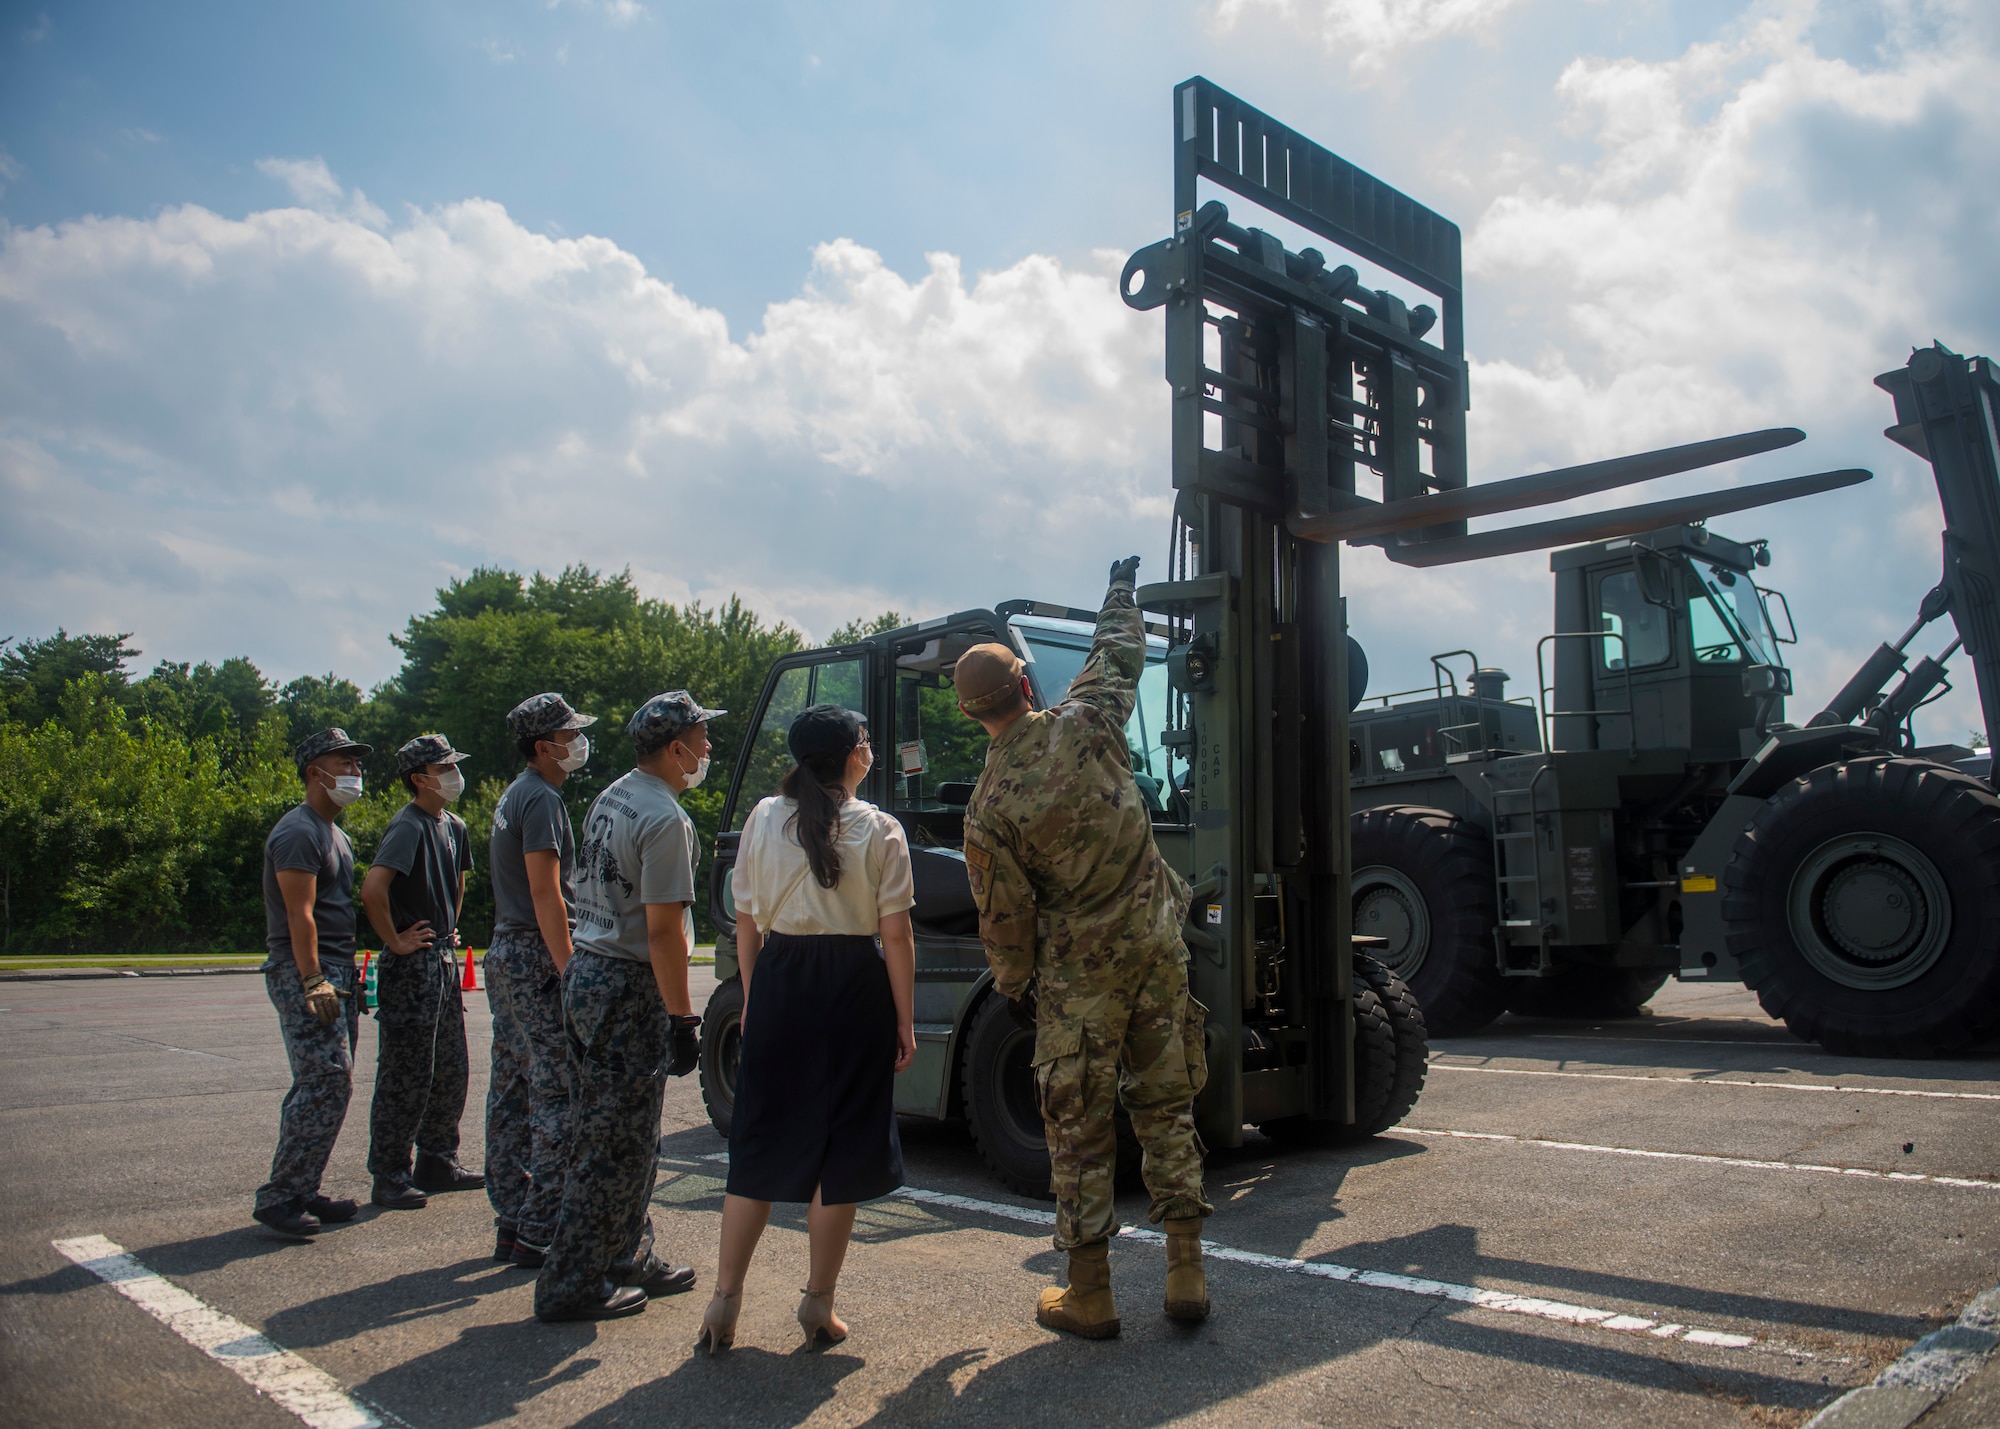 JASDF members watches as USAF members display different parts and actions of a forklift.